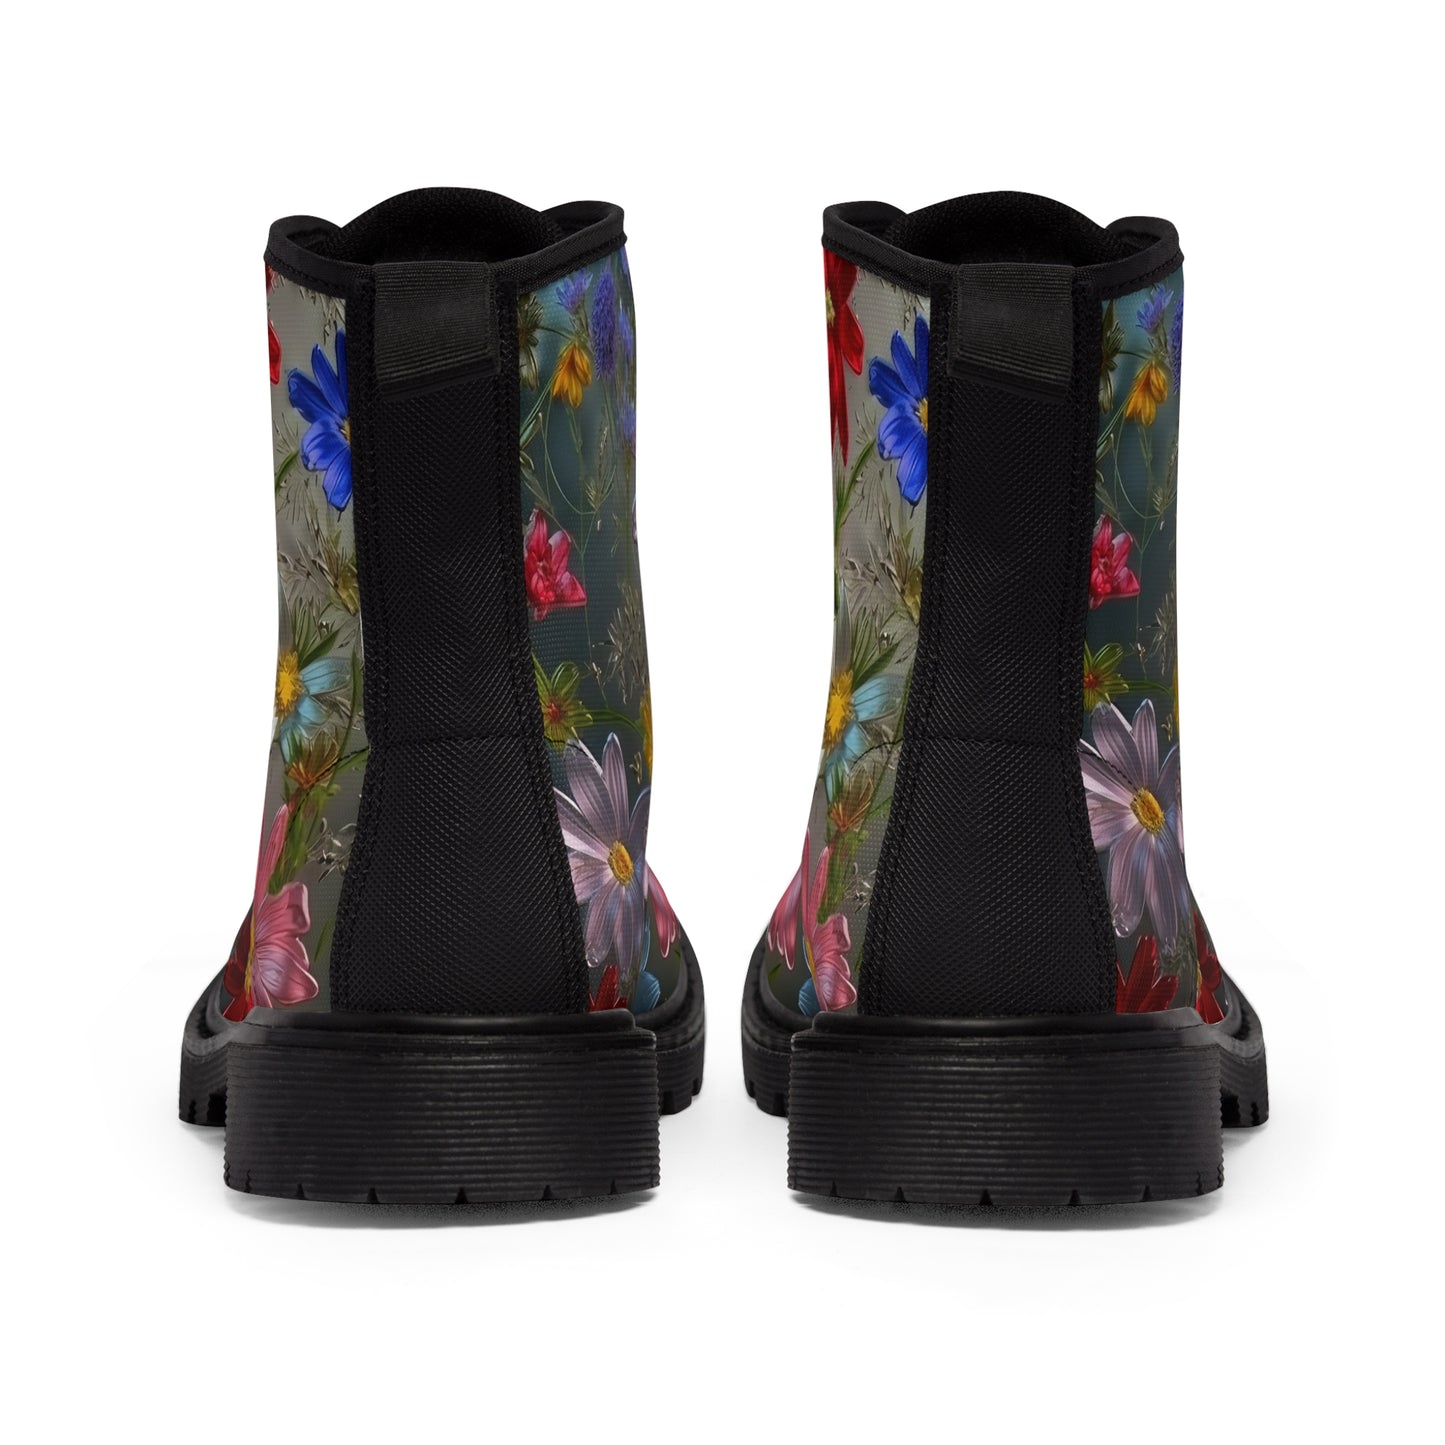 Bold & Beautiful & Metallic Wildflowers, Gorgeous floral Design, Style 6 Women's Canvas Boots